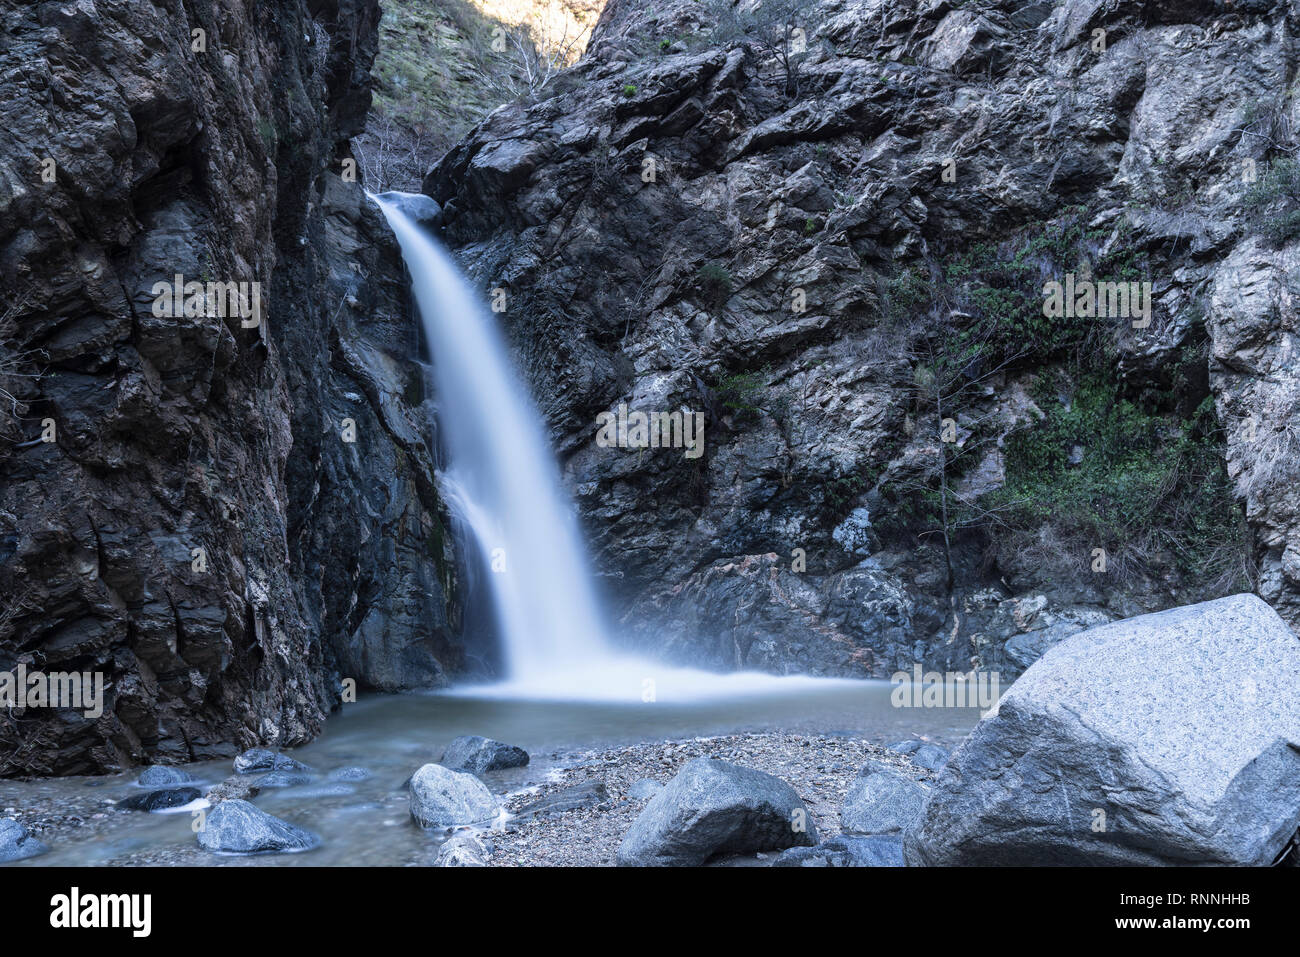 Eaton canyon falls in the San Gabriel Mountains near Los Angeles and Pasadena in Southern California. Stock Photo